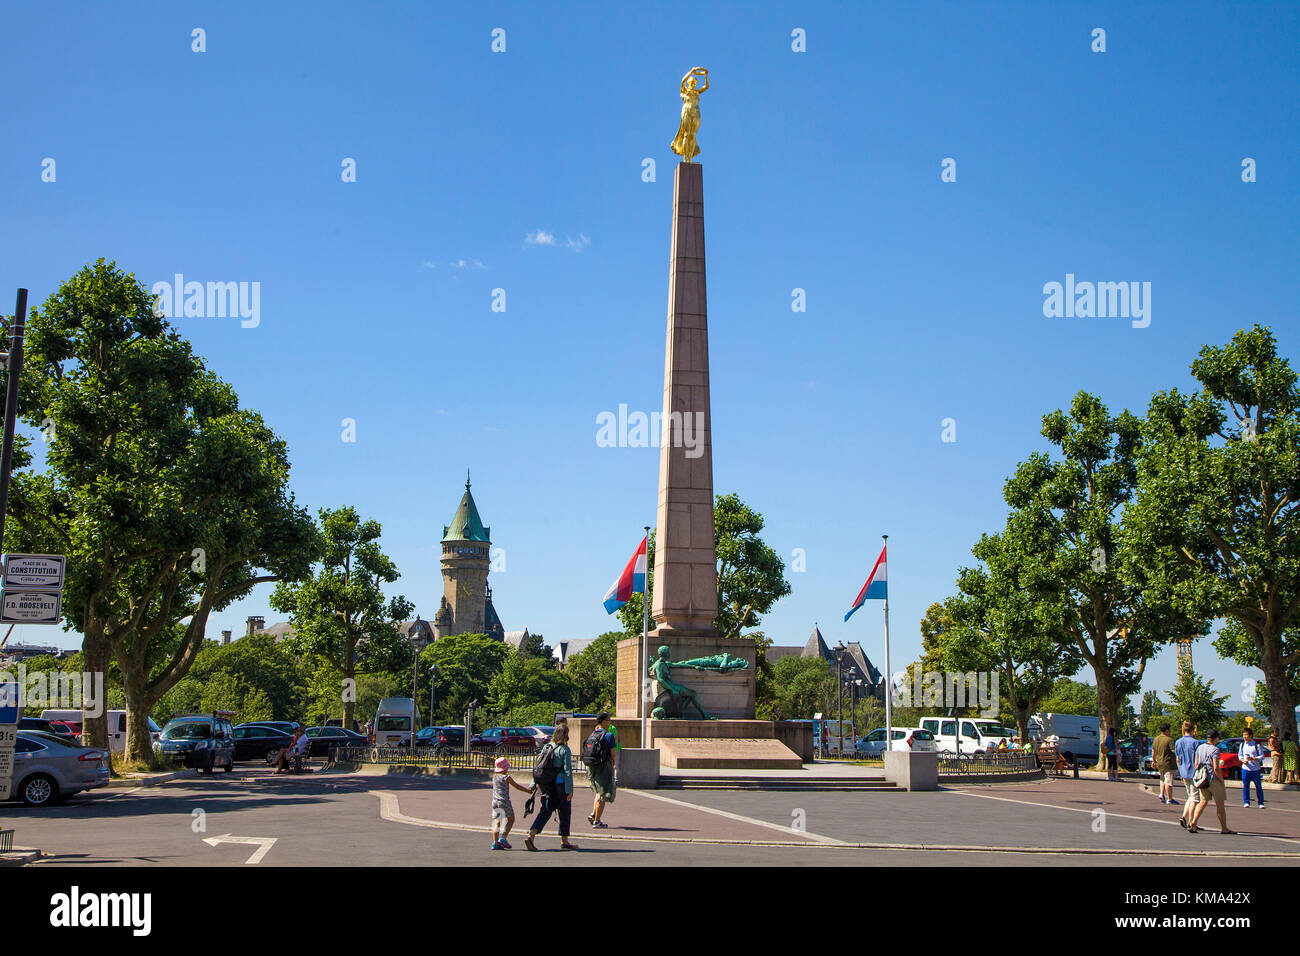 Stone obelisk with golden woman, Gelle Fra, memorial at Place de la Constitution, Luxembourg-city, Luxembourg, Europe Stock Photo